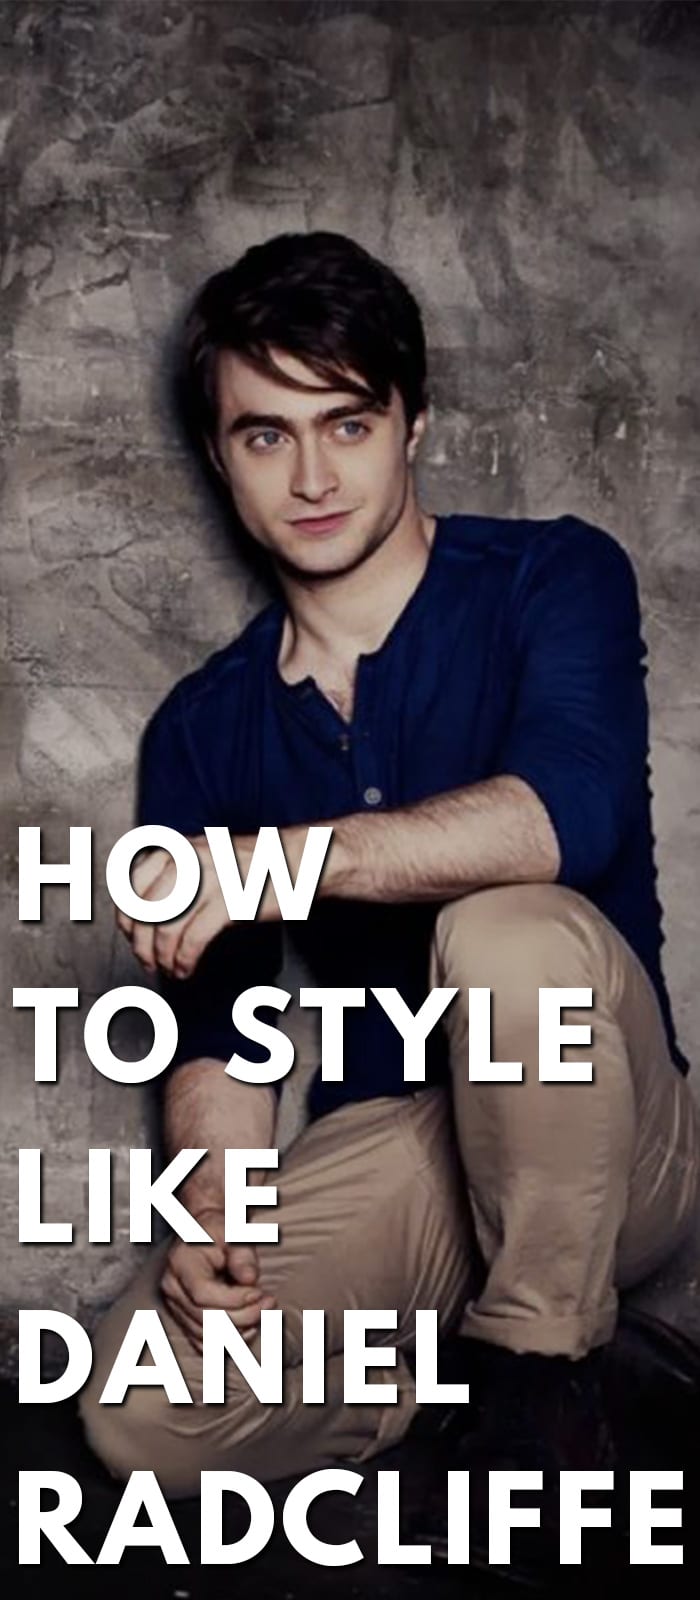 How To Style Like Daniel Radcliffe!